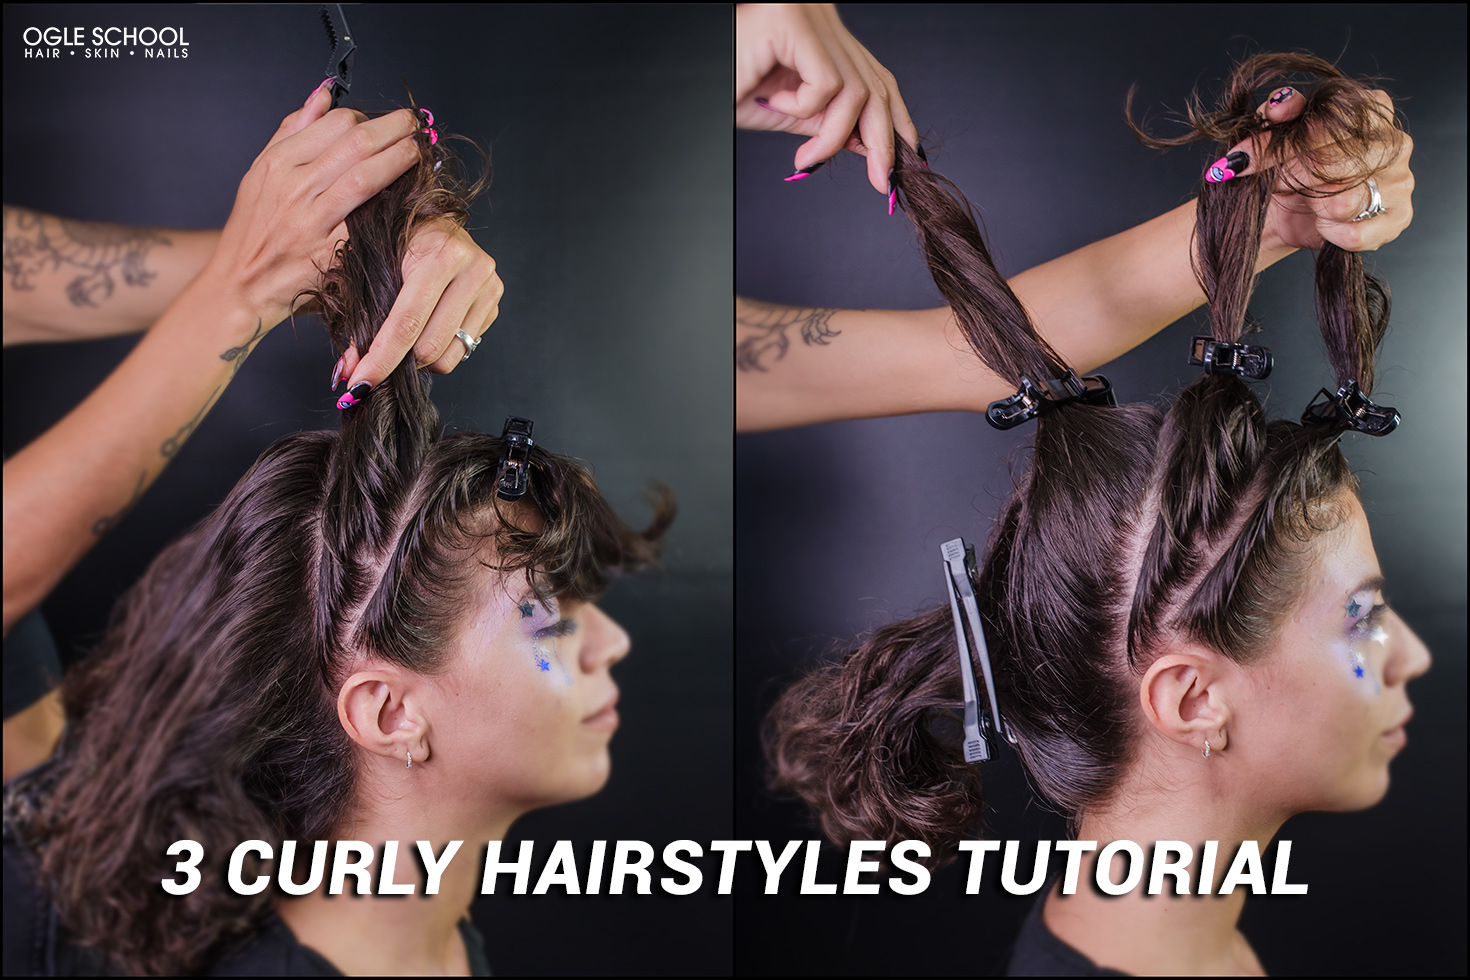 Tutorial: How to Achieve Curly Hairstyles - Cosmetology School & Beauty  School in Texas - Ogle School